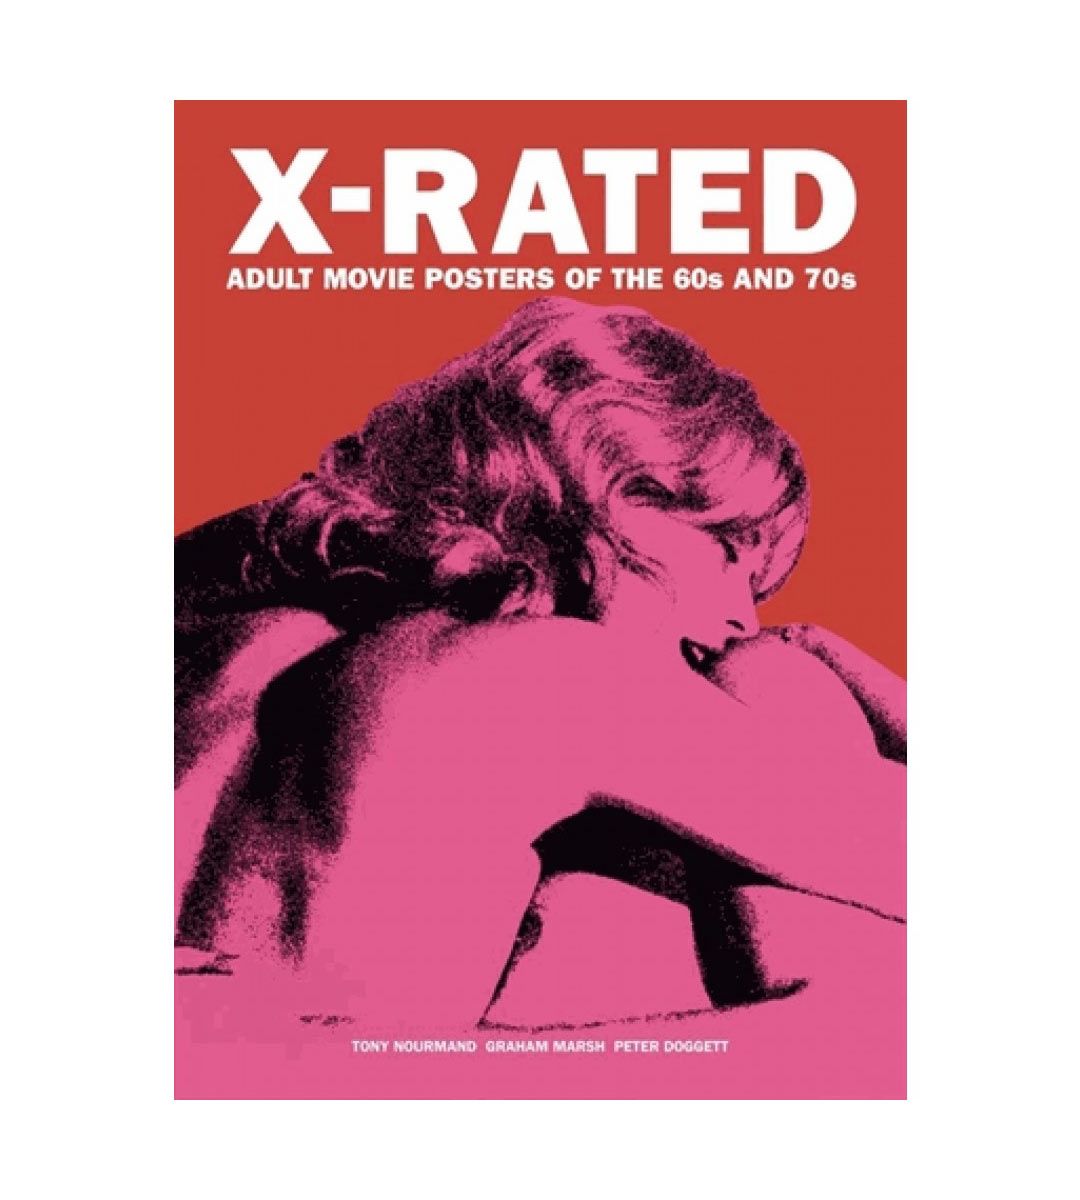 X-RATED adult movie posters of the 60s and 70s